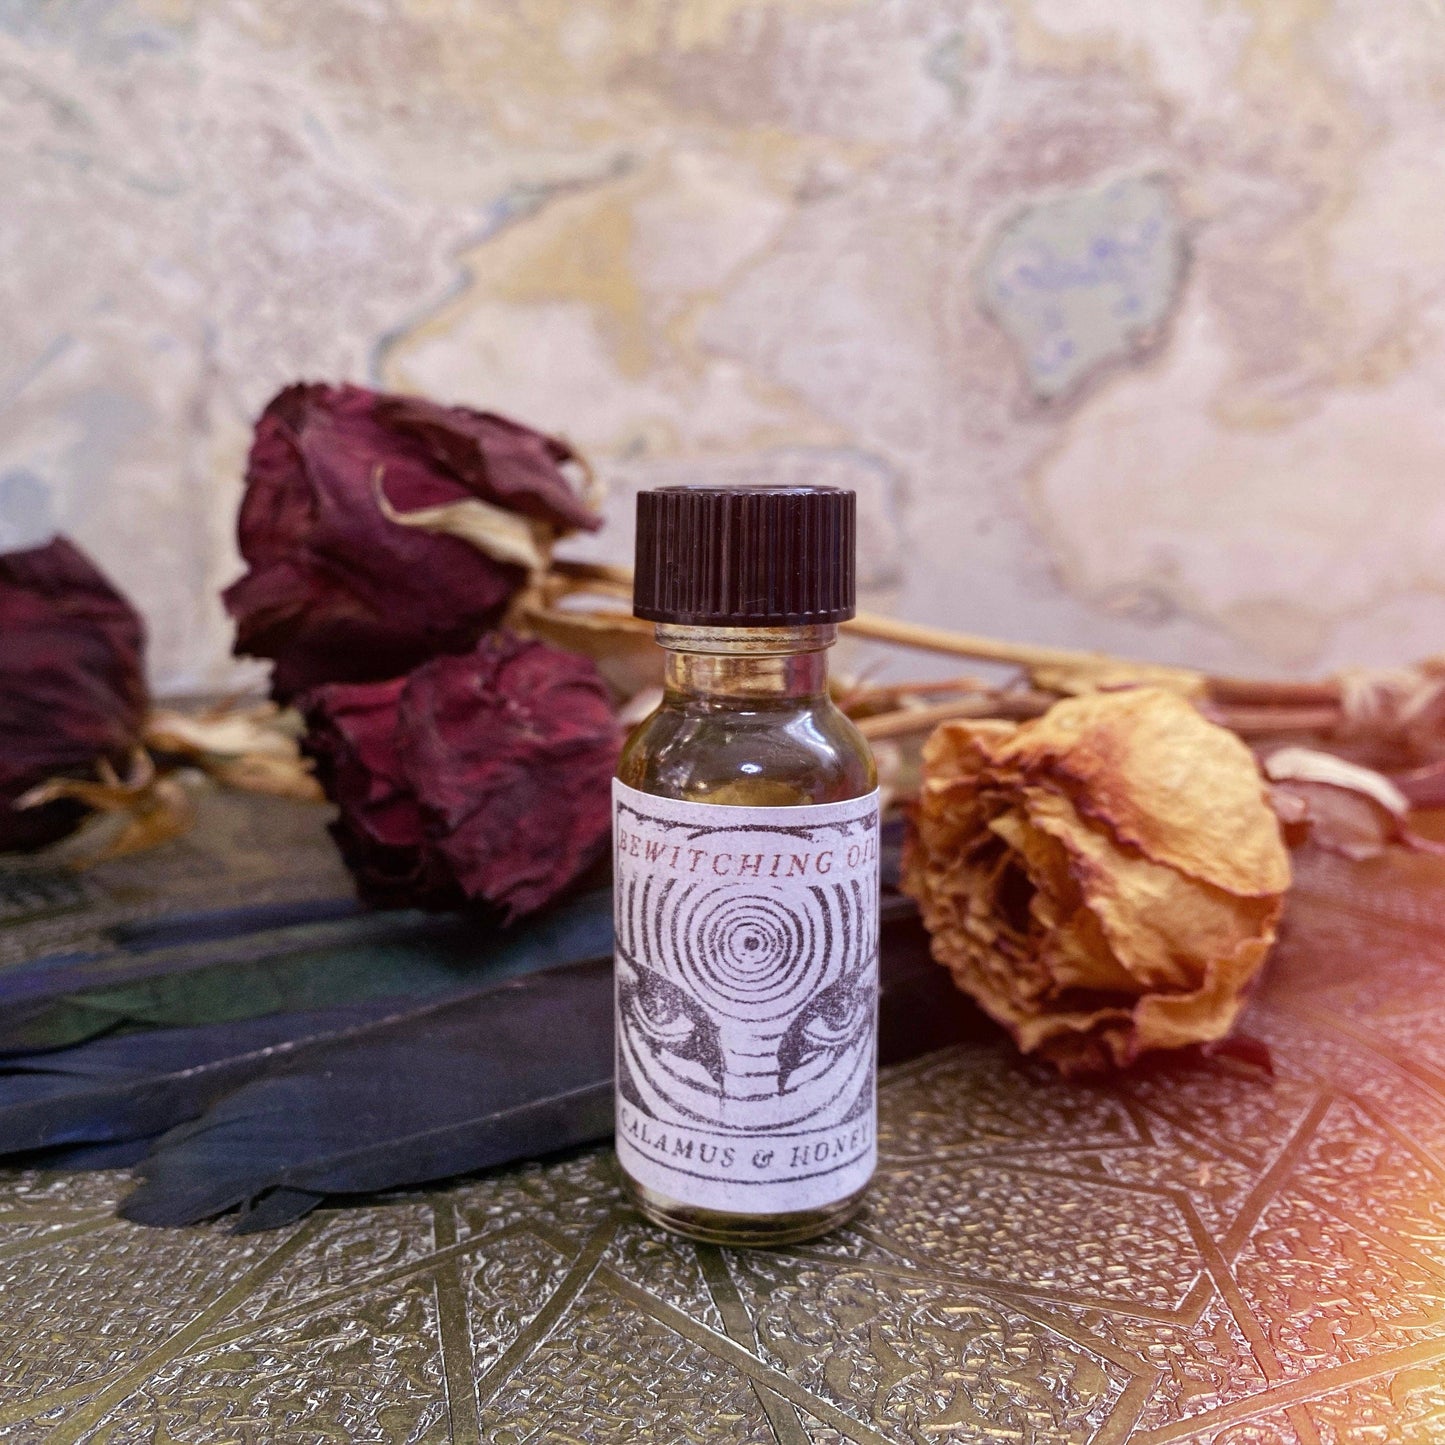 Bewitching Oil